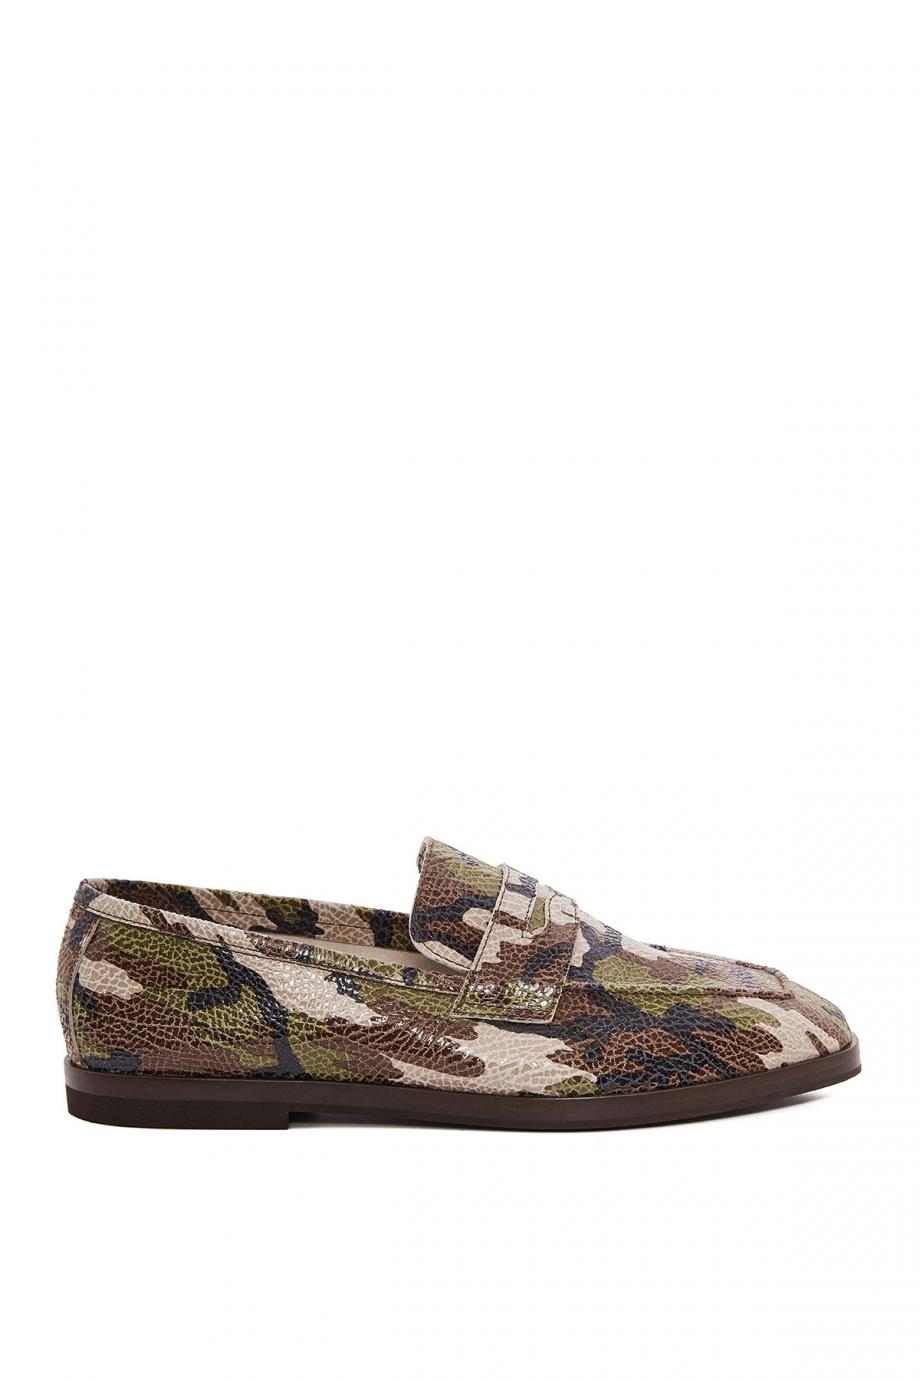 Chalet Donna printed leather loafers